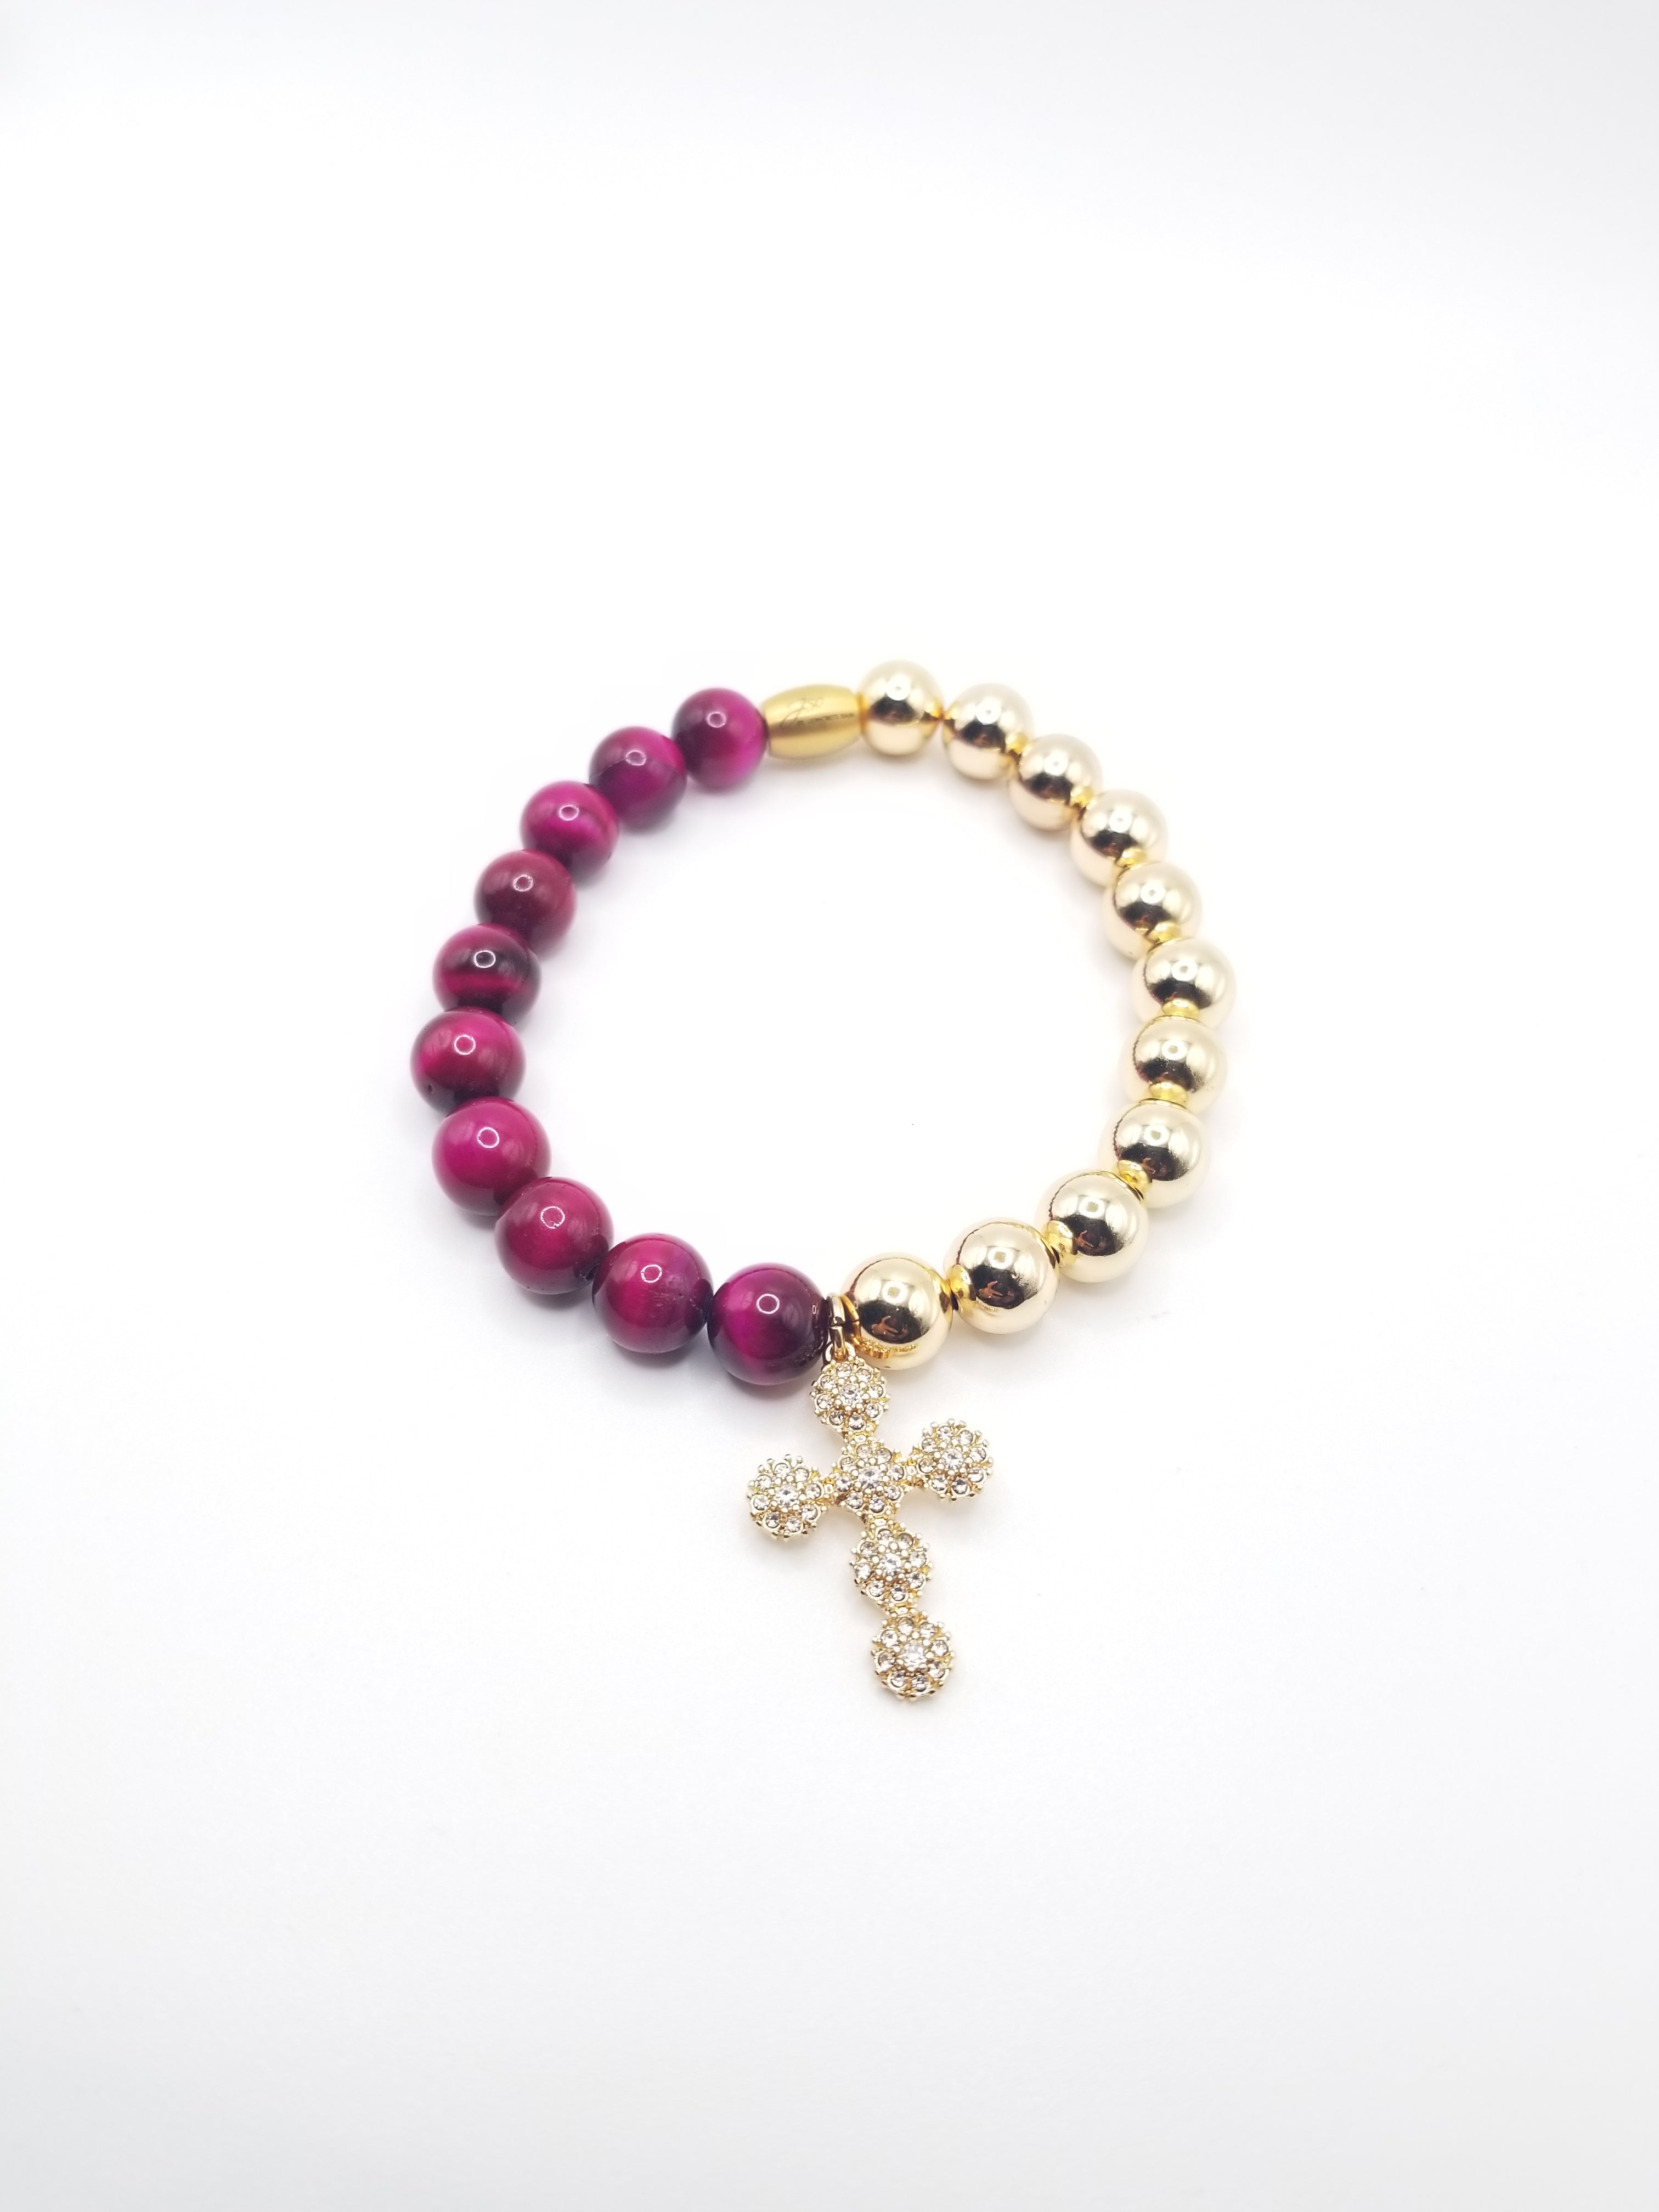 Pink and Gold-filled Beaded Bracelet with Cross Pendant